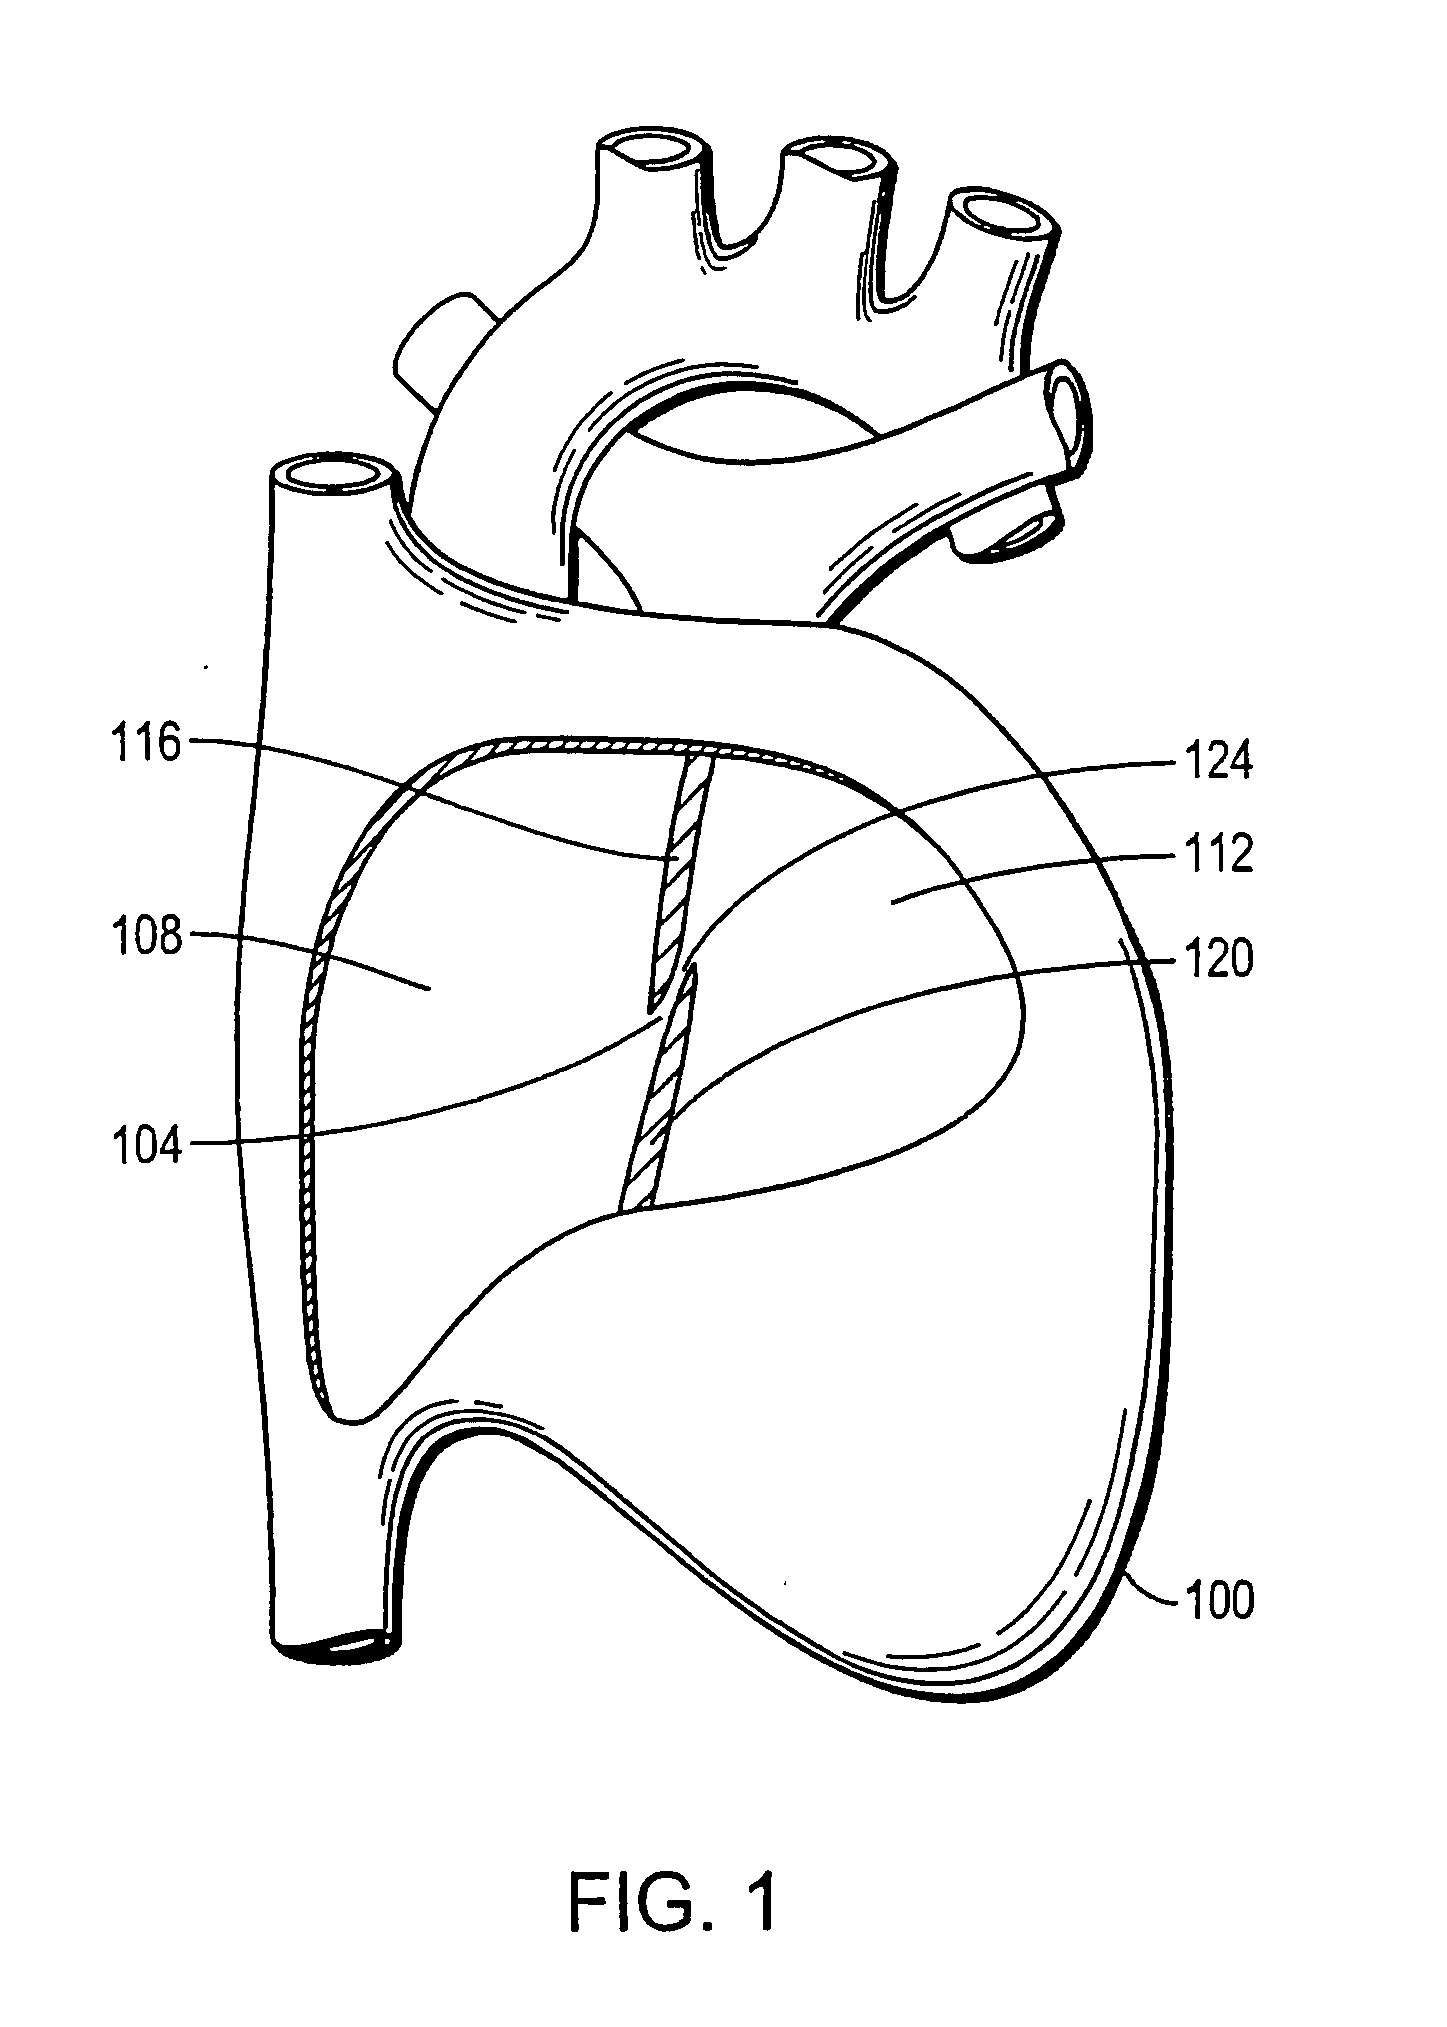 Device with biological tissue scaffold for percutaneous closure of an intracardiac defect and methods thereof